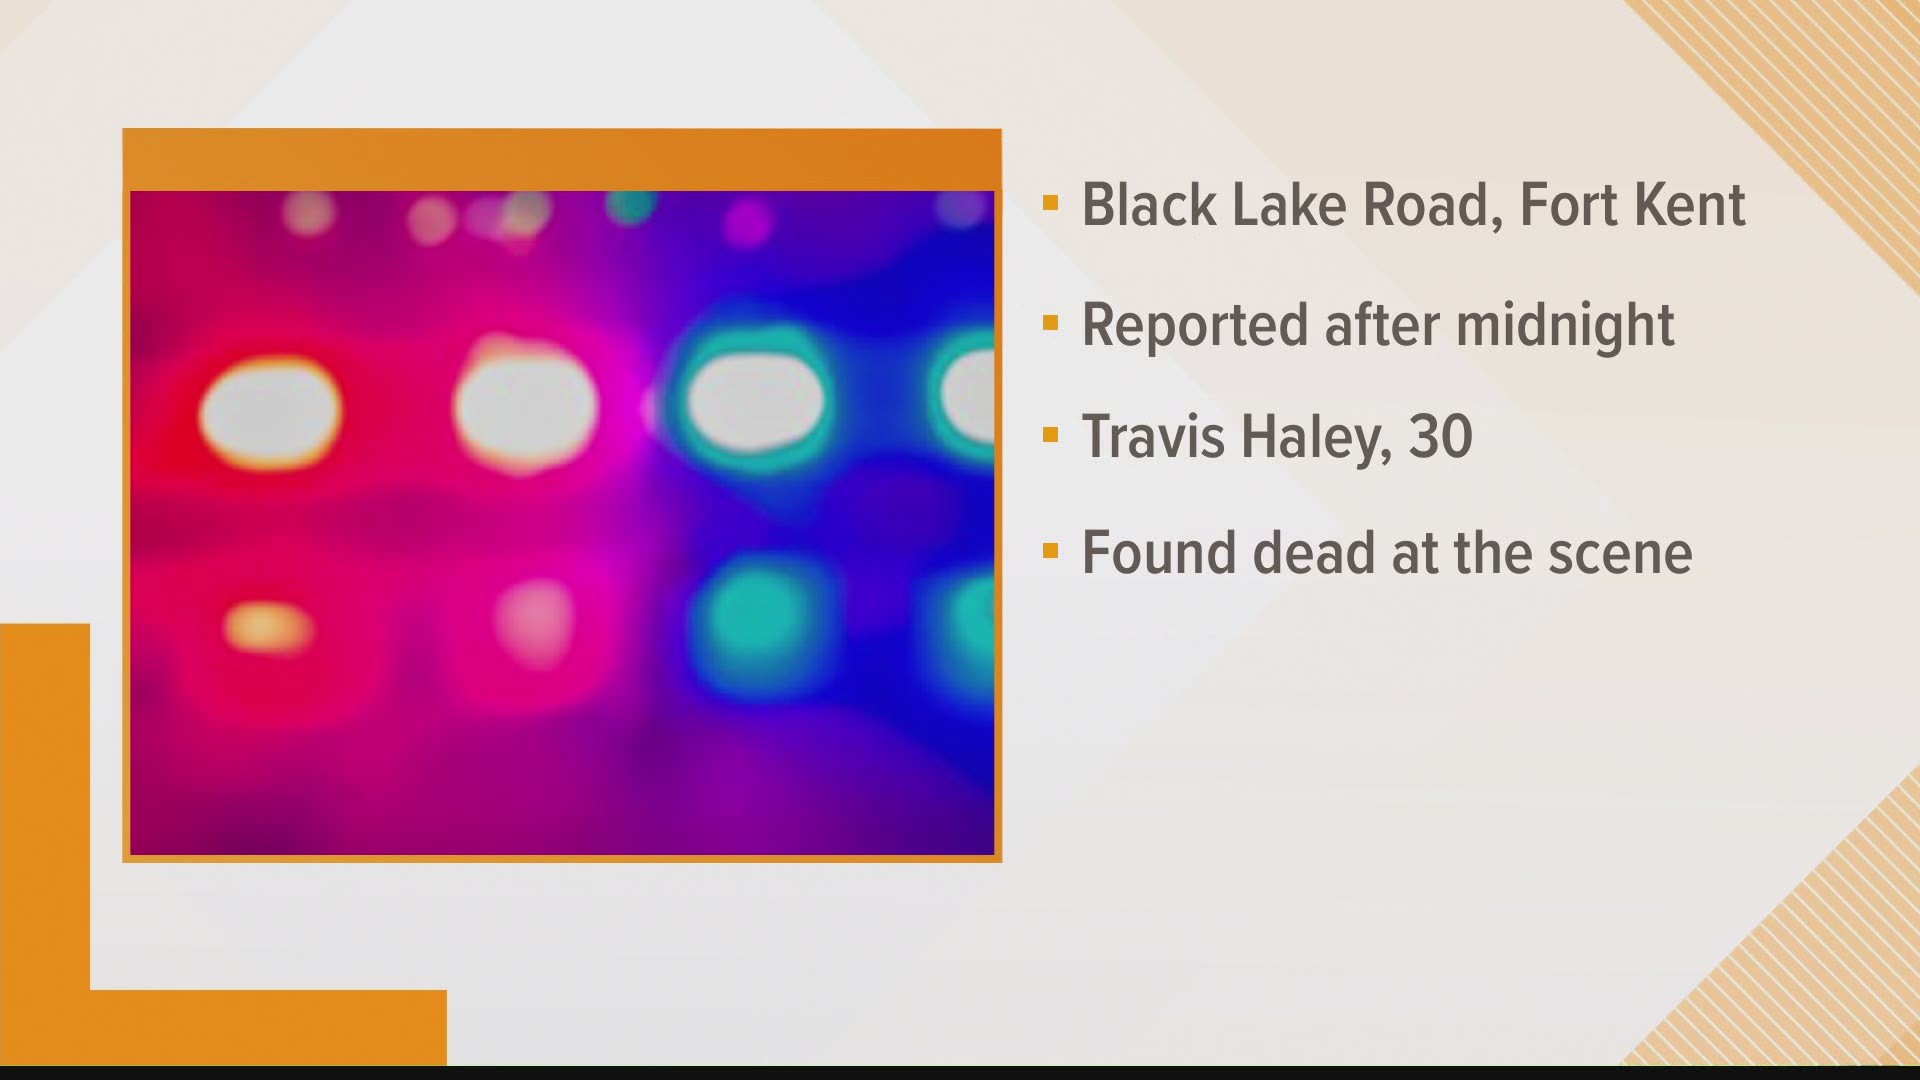 According to the Maine Department of Inland Fisheries and Wildlife, it happened shortly before midnight on Black Lake Road in Fort Kent.